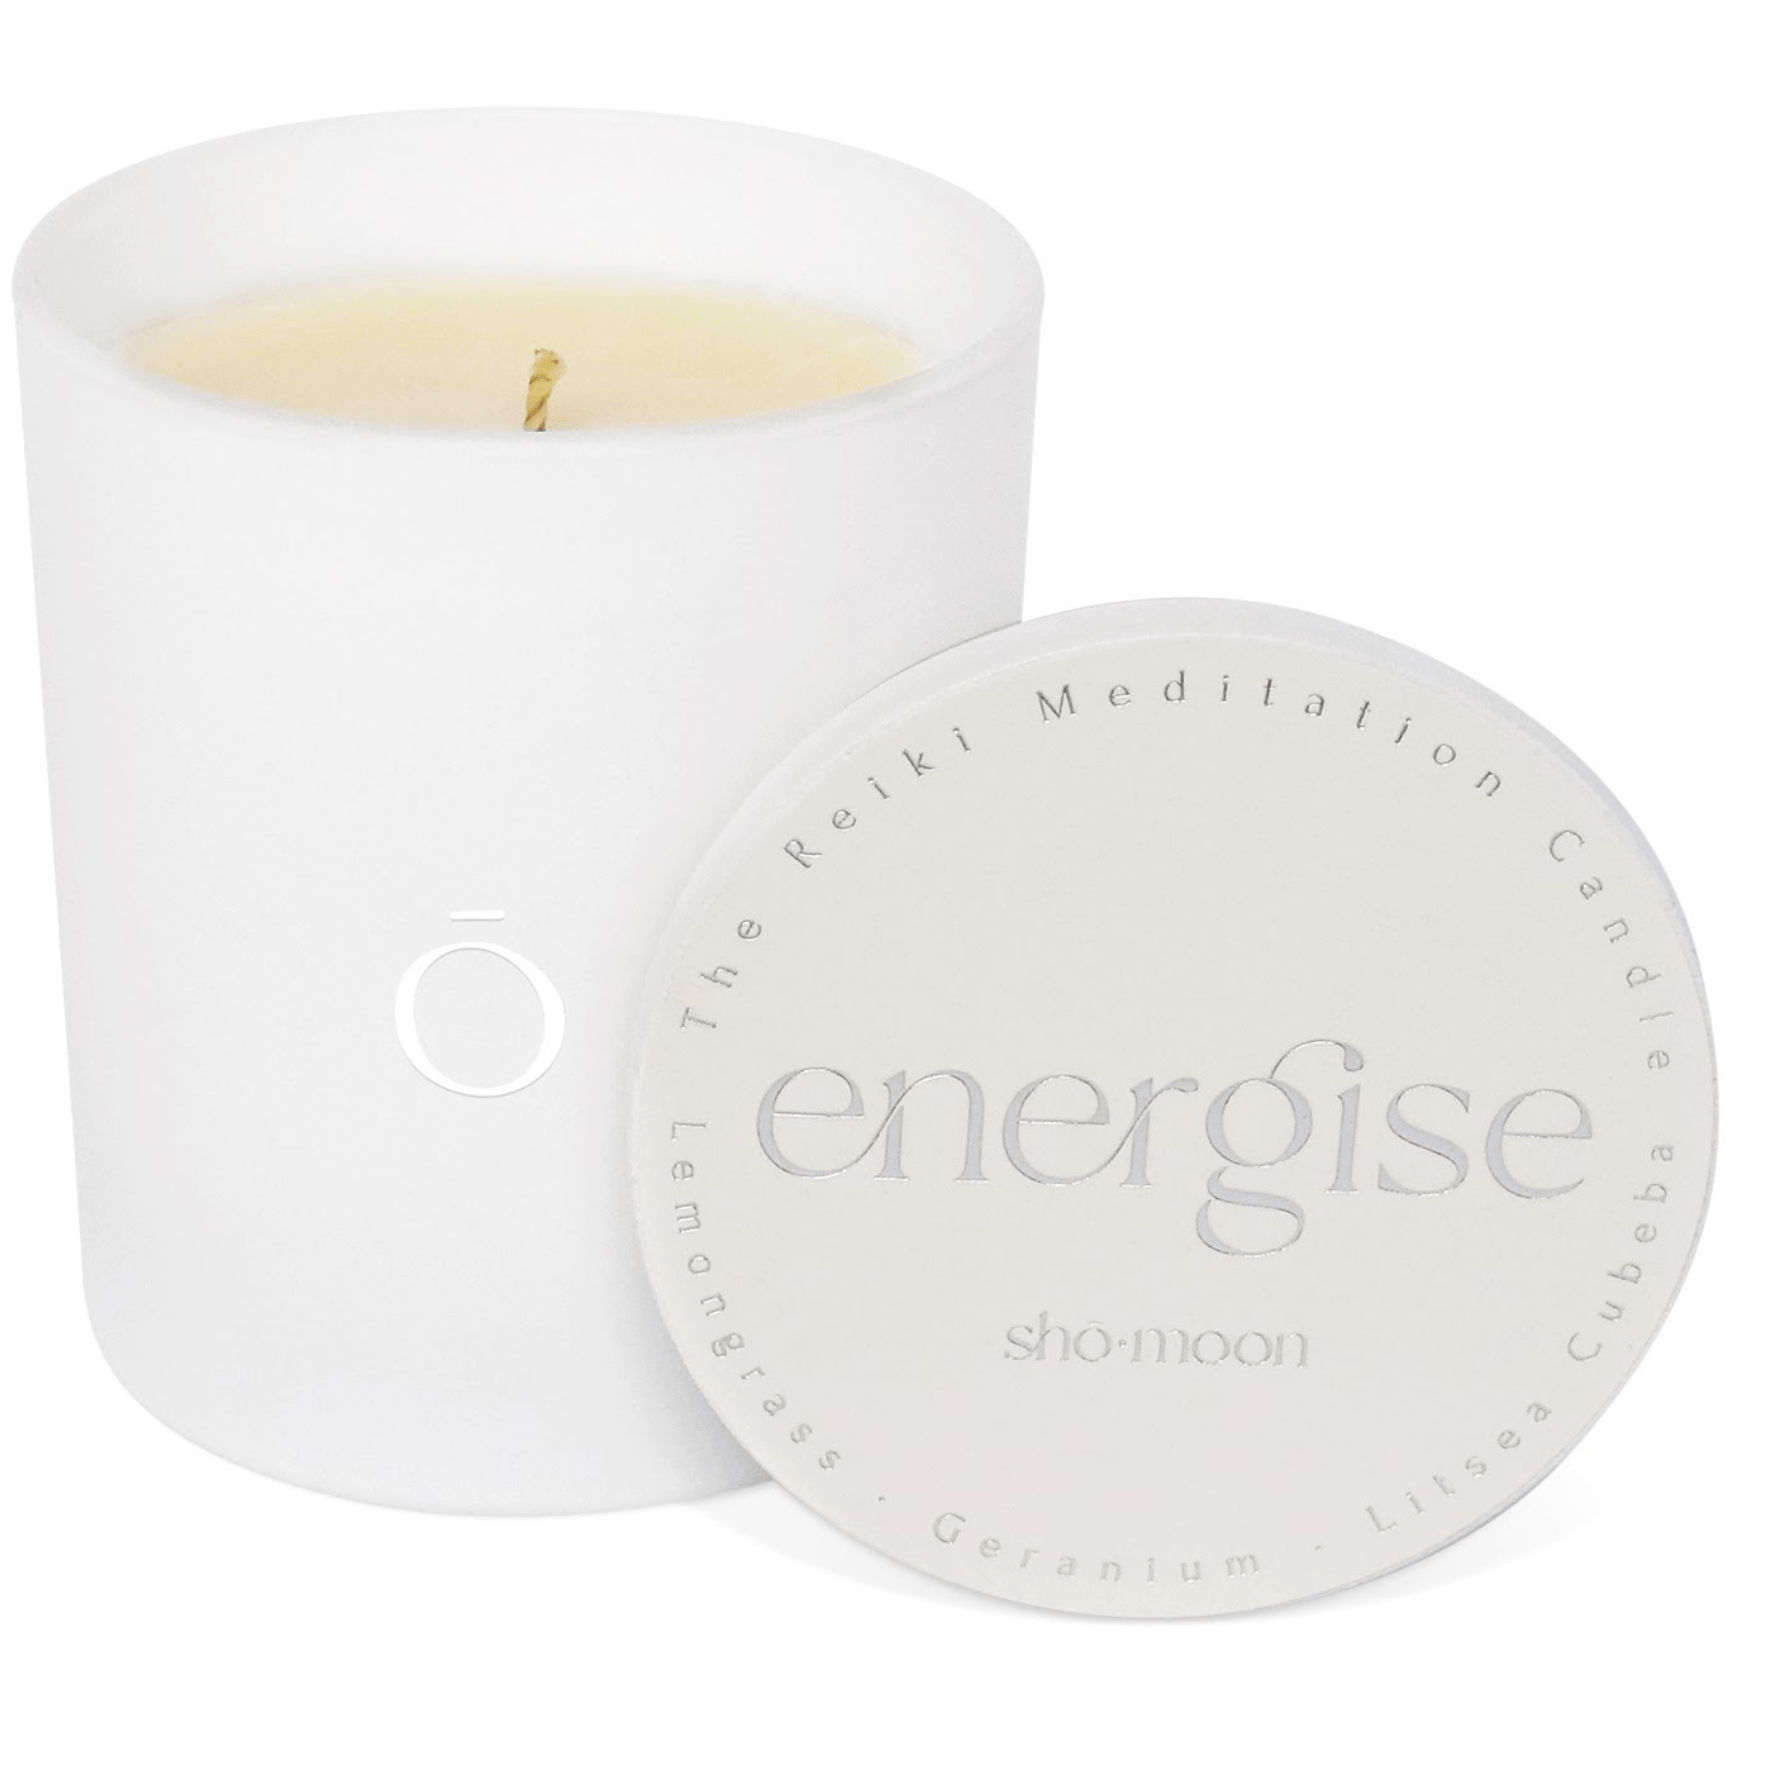 Shō-moon Energise Meditation Candle with pure essentials oils and clean burning natural wax